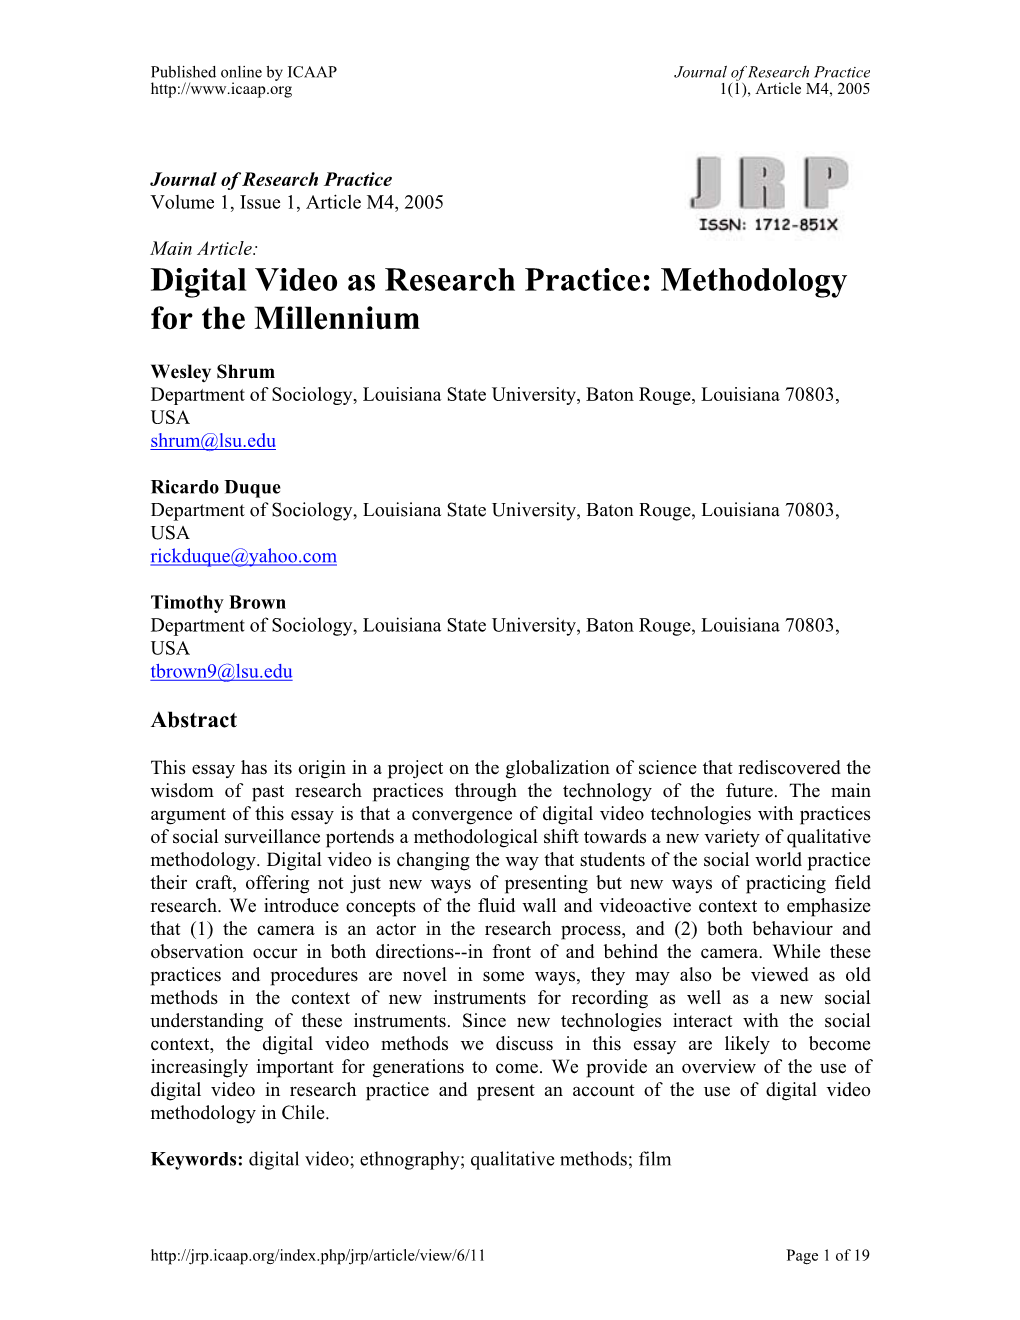 Digital Video As Research Practice: Methodology for the Millennium